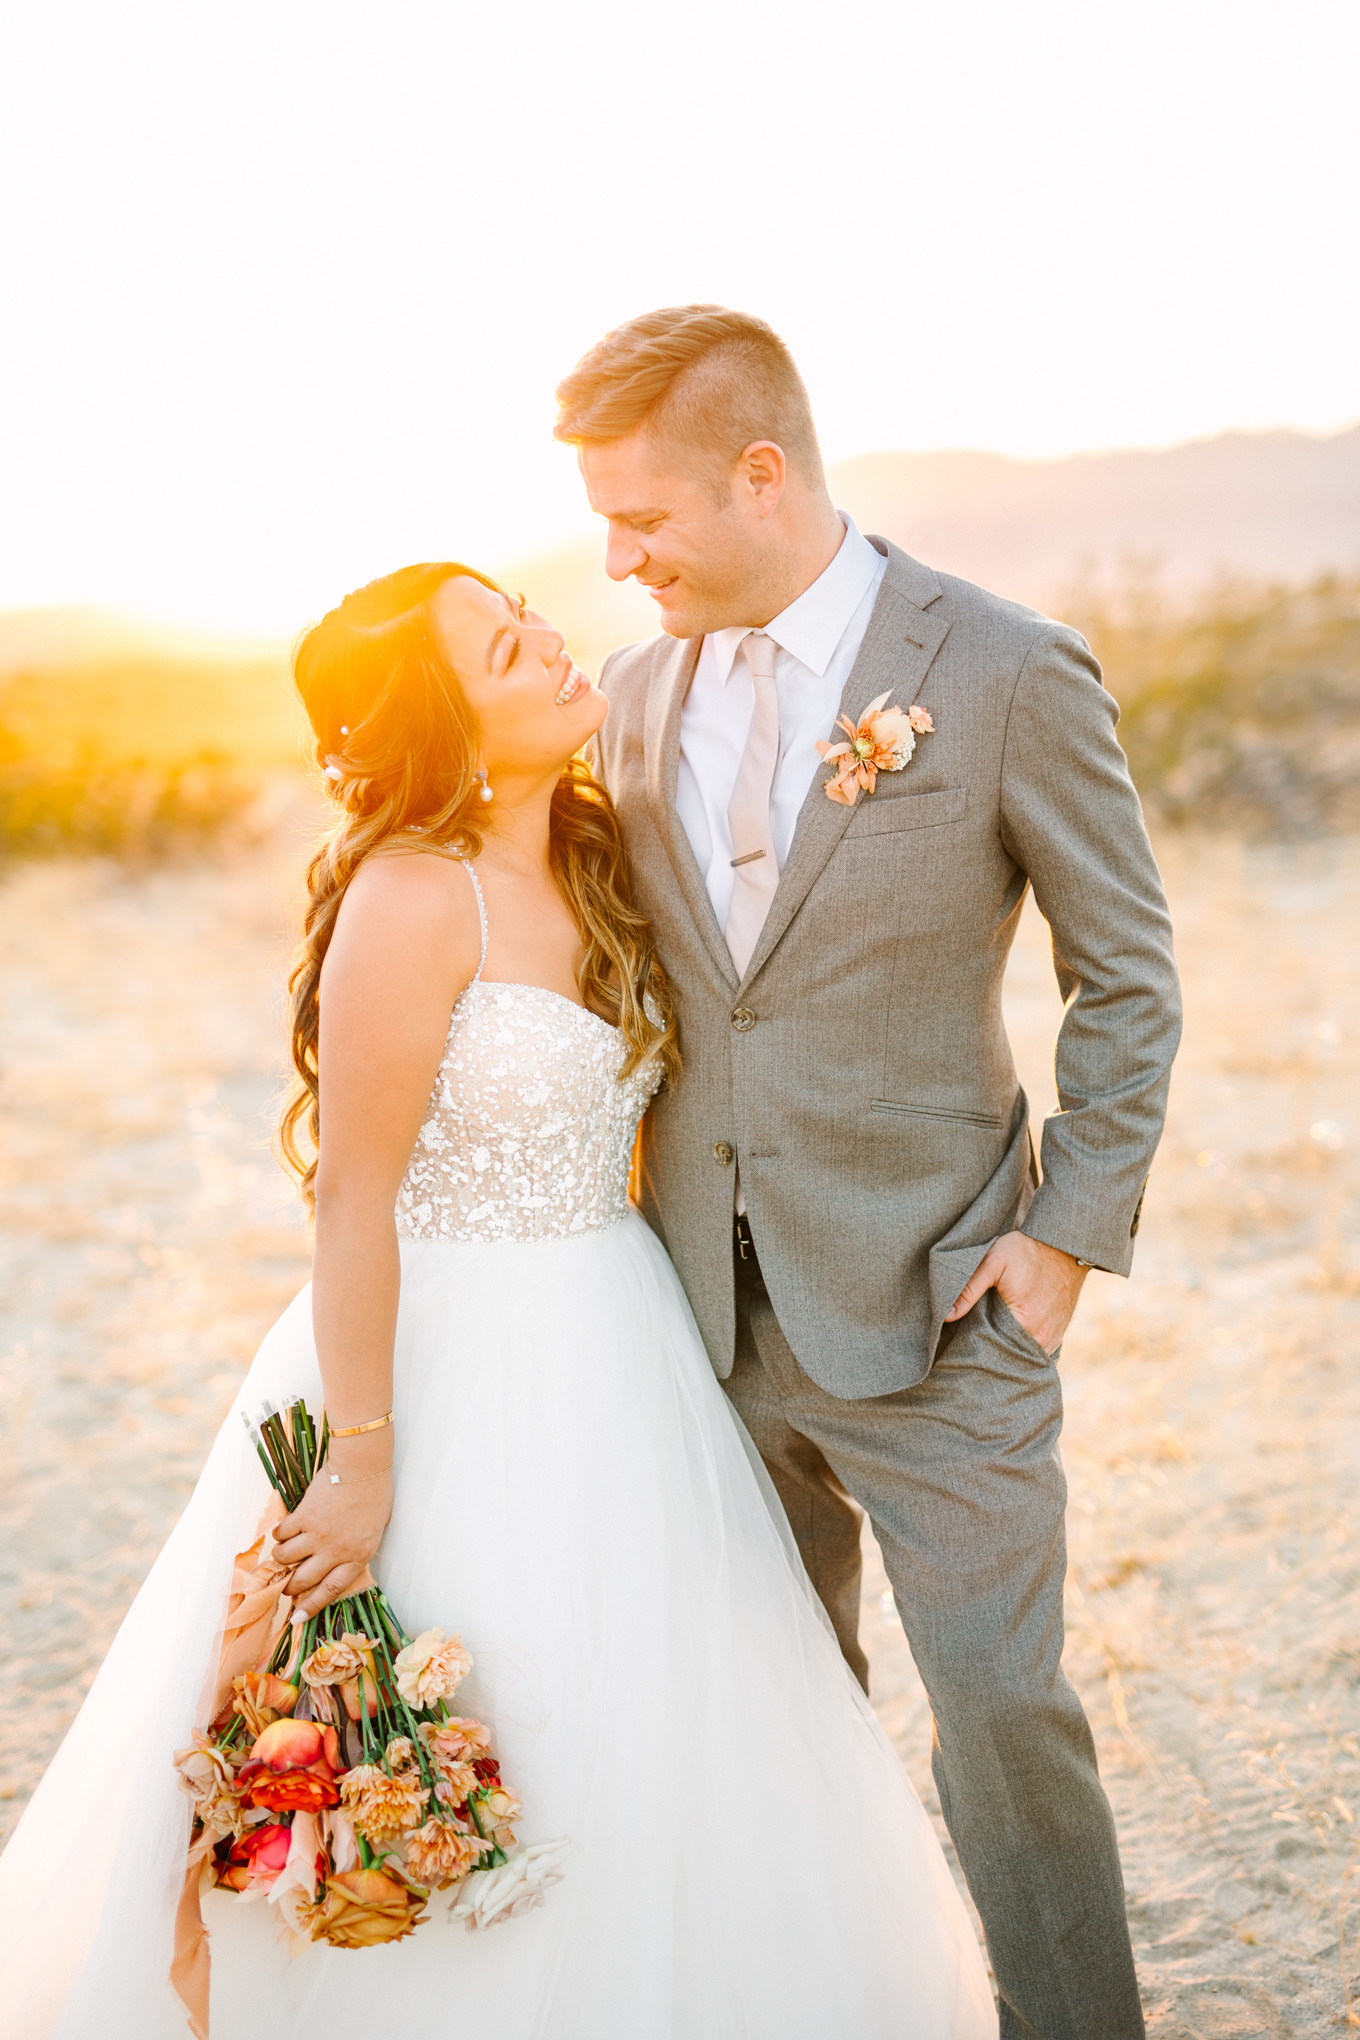 Bride and groom at sunset in the desert | Pink and orange Lautner Compound wedding | Colorful Palm Springs wedding photography | #palmspringsphotographer #palmspringswedding #lautnercompound #southerncaliforniawedding  Source: Mary Costa Photography | Los Angeles